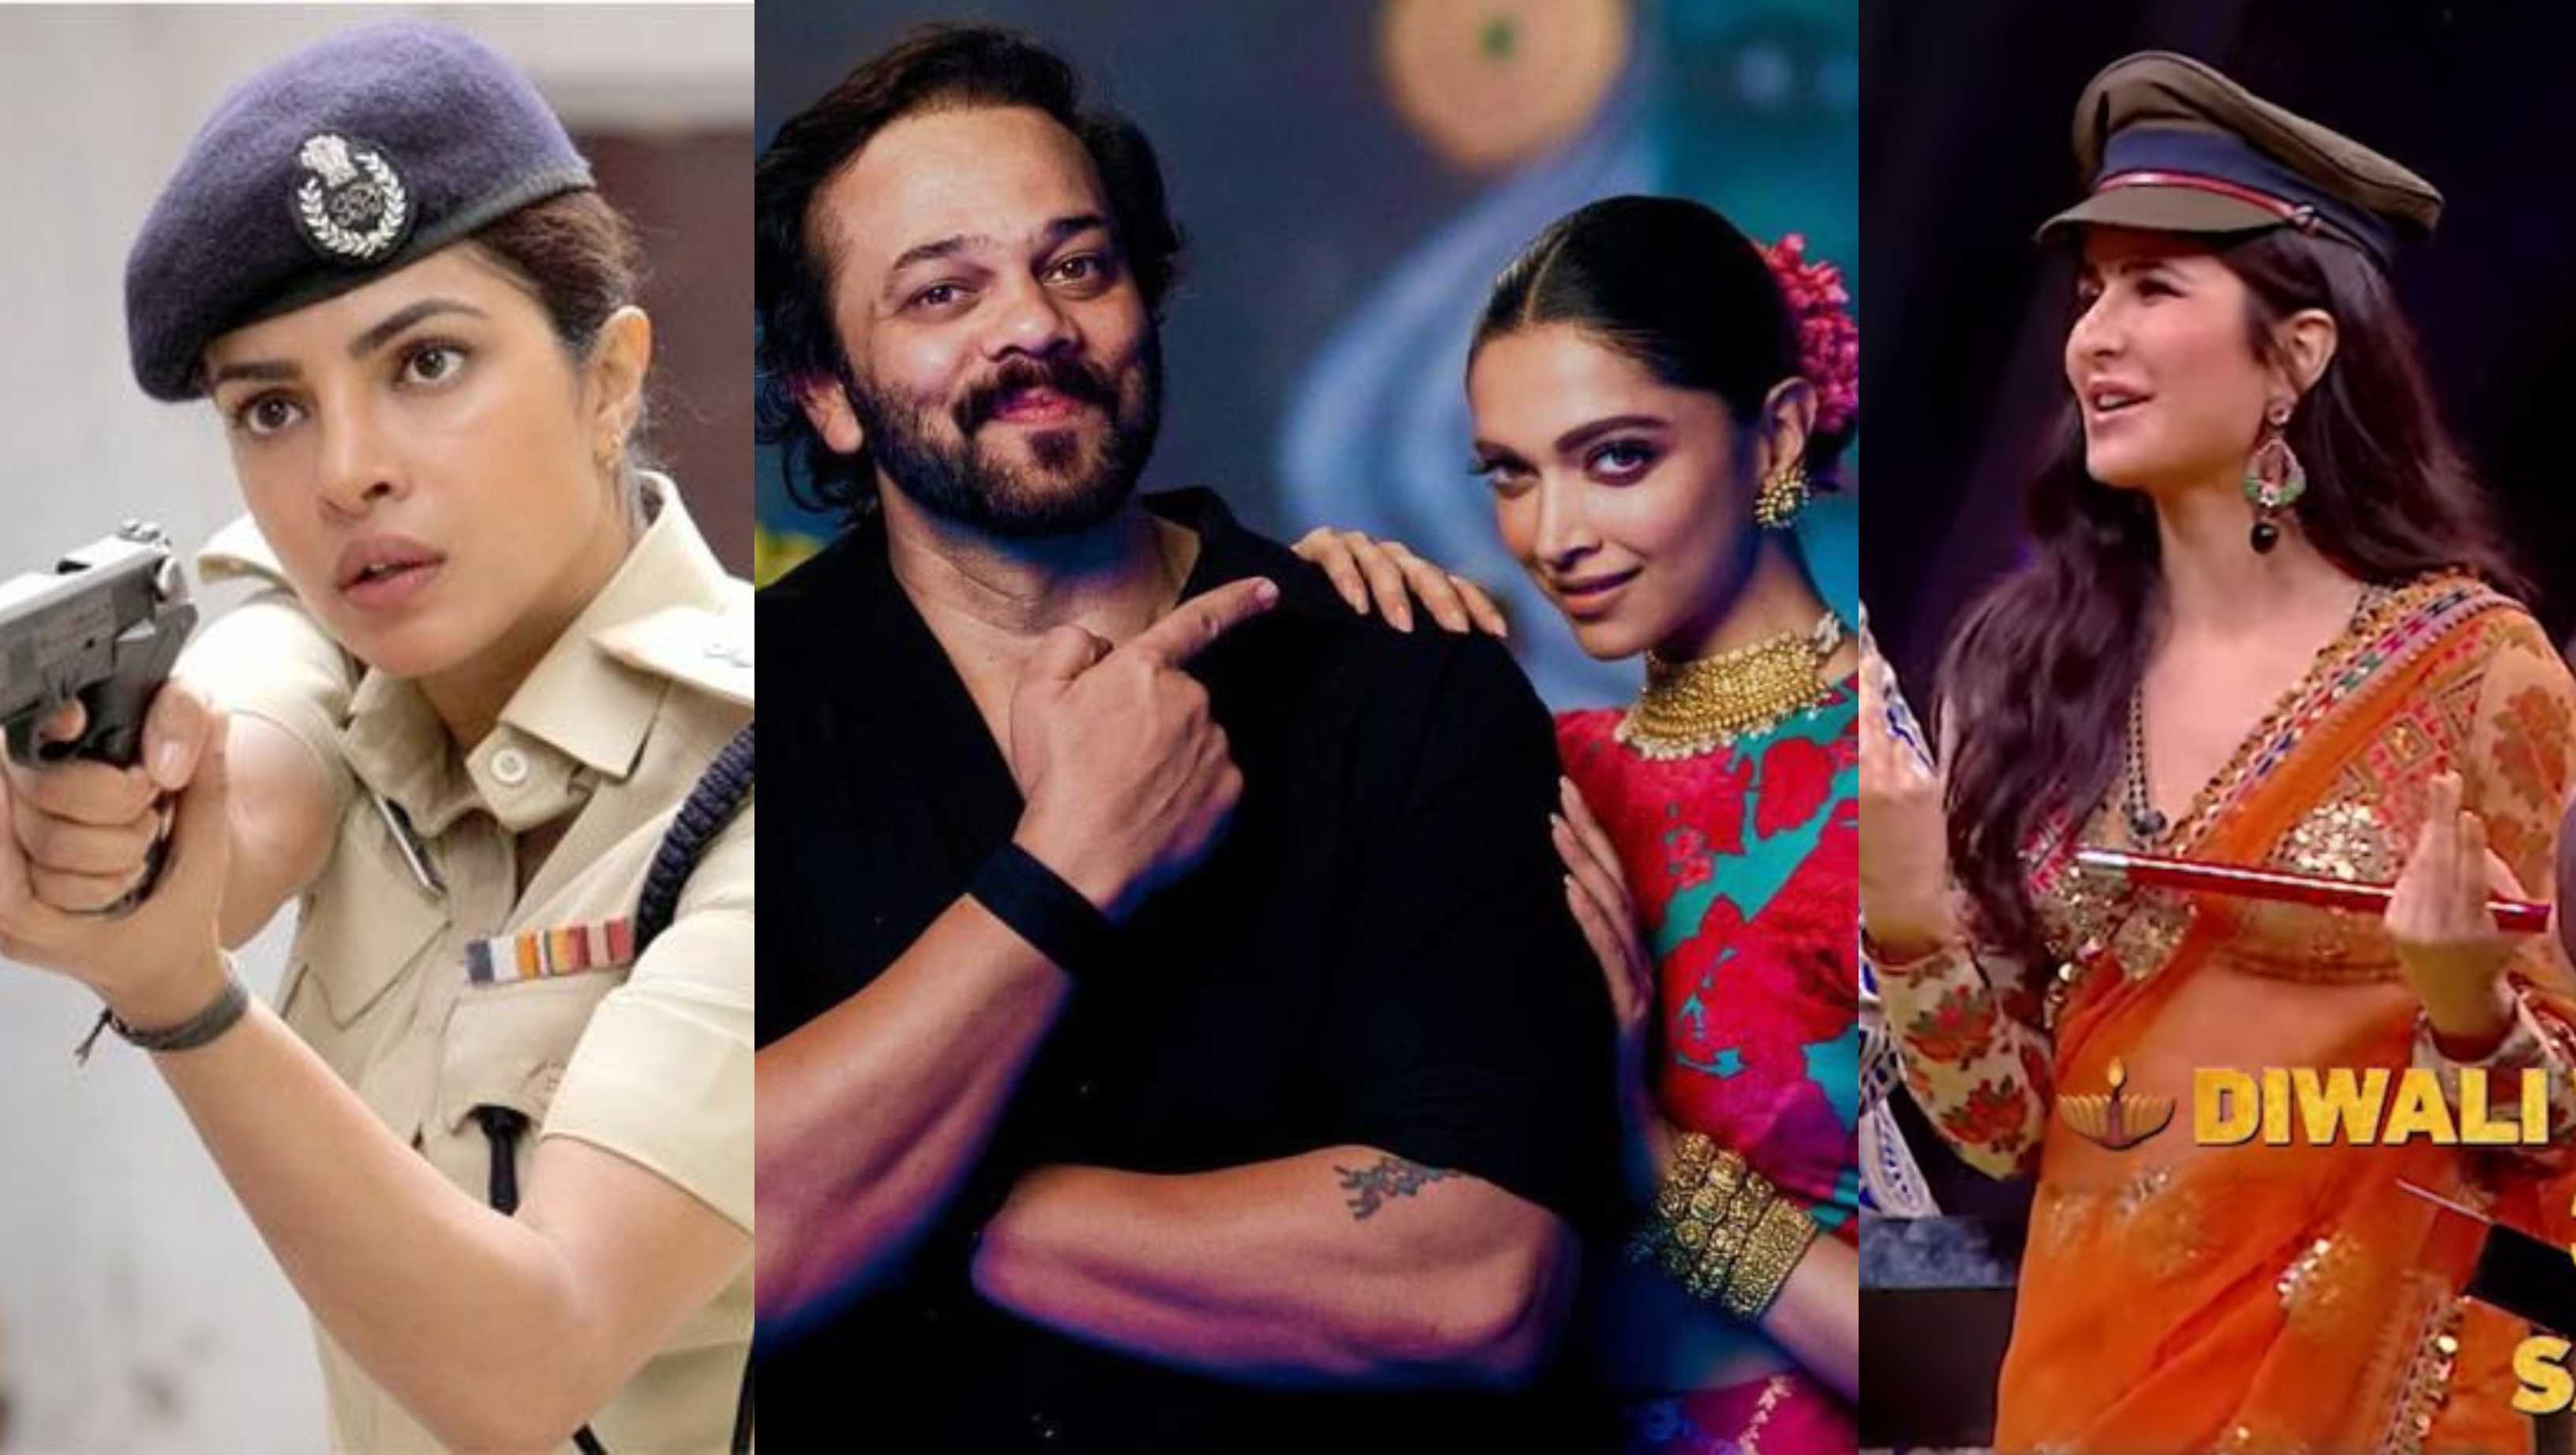 Sorry Deepika Padukone, but netizens feel THESE actresses are better choices for Lady Singham